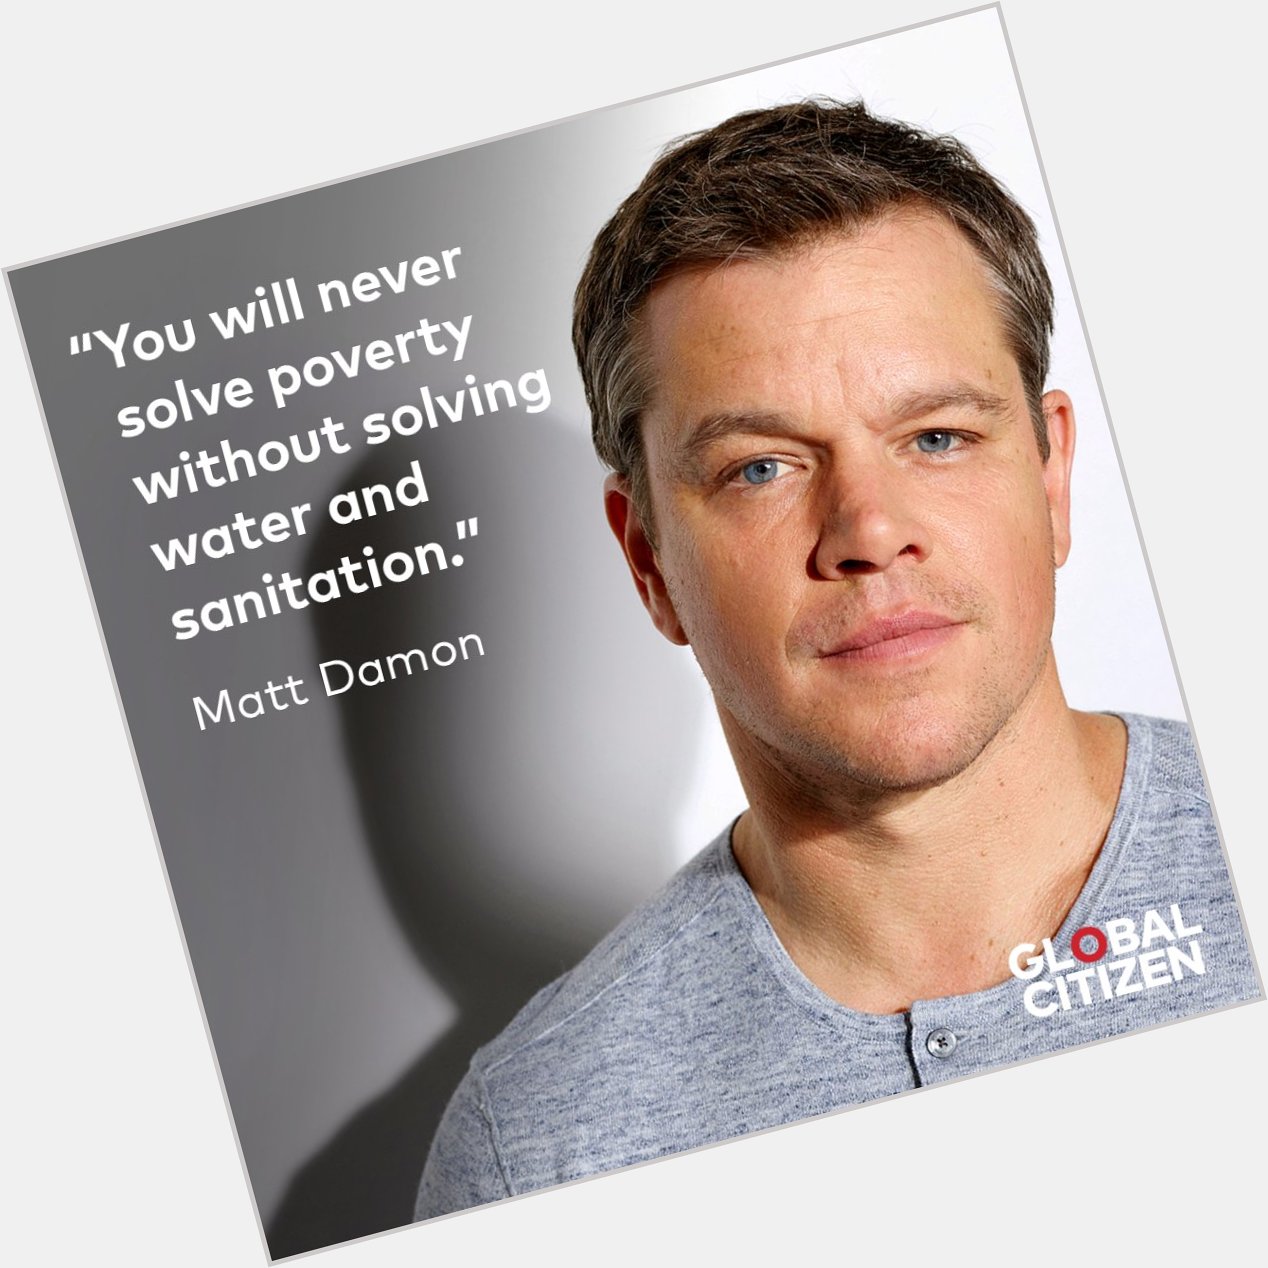 Happy birthday to co-founder Matt Damon! Thanks for being a champion for clean water and sanitation, Matt 